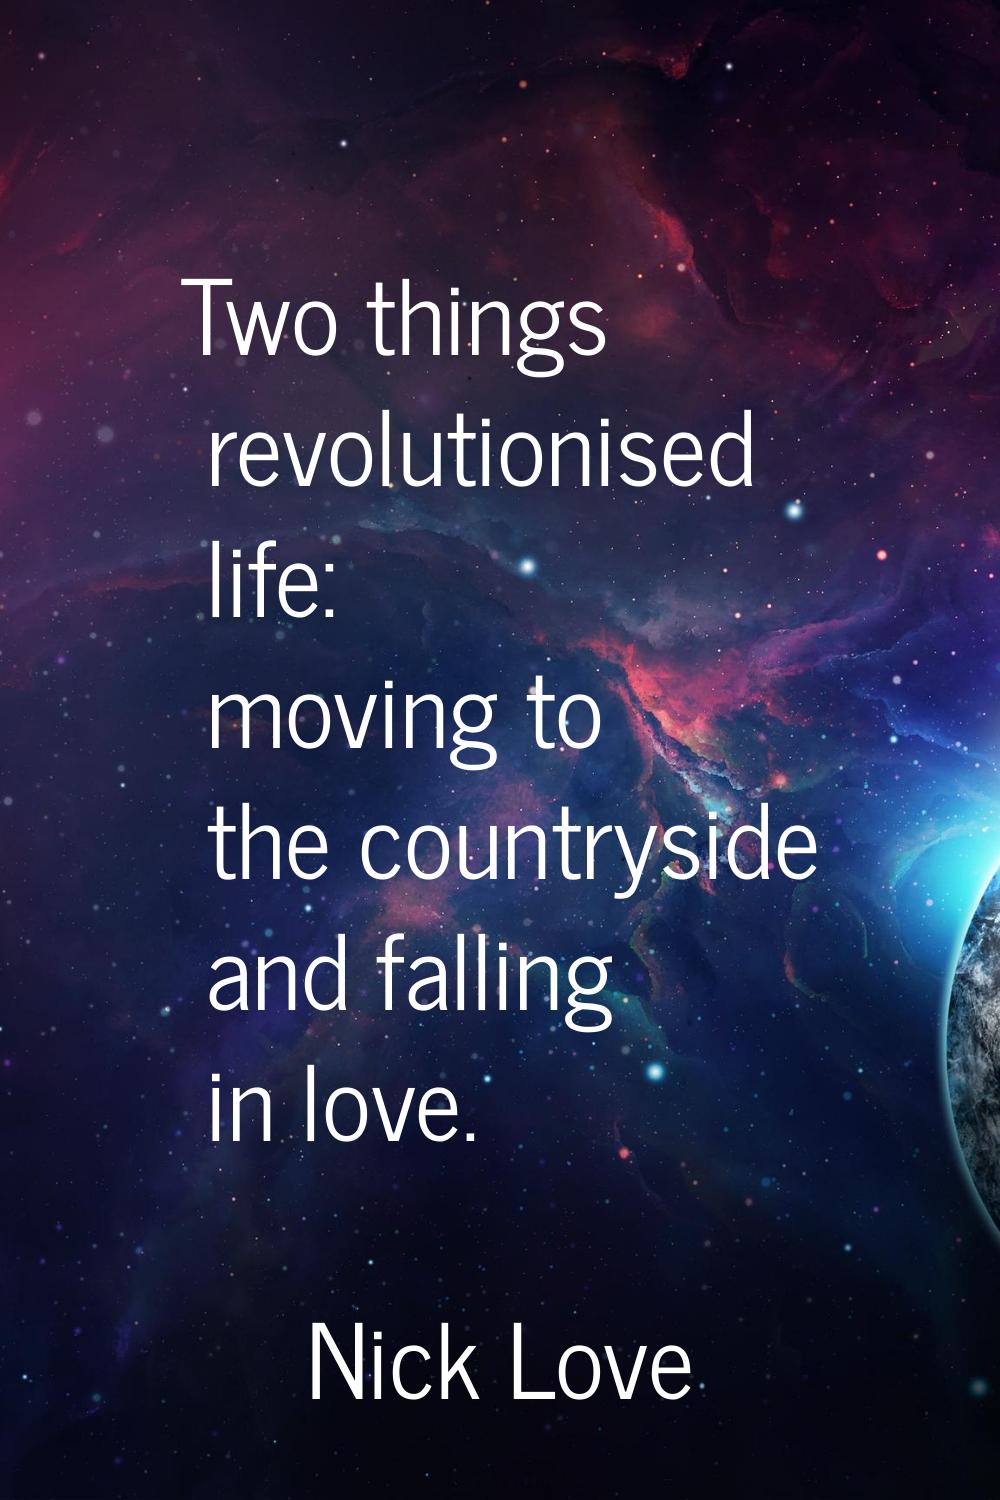 Two things revolutionised life: moving to the countryside and falling in love.